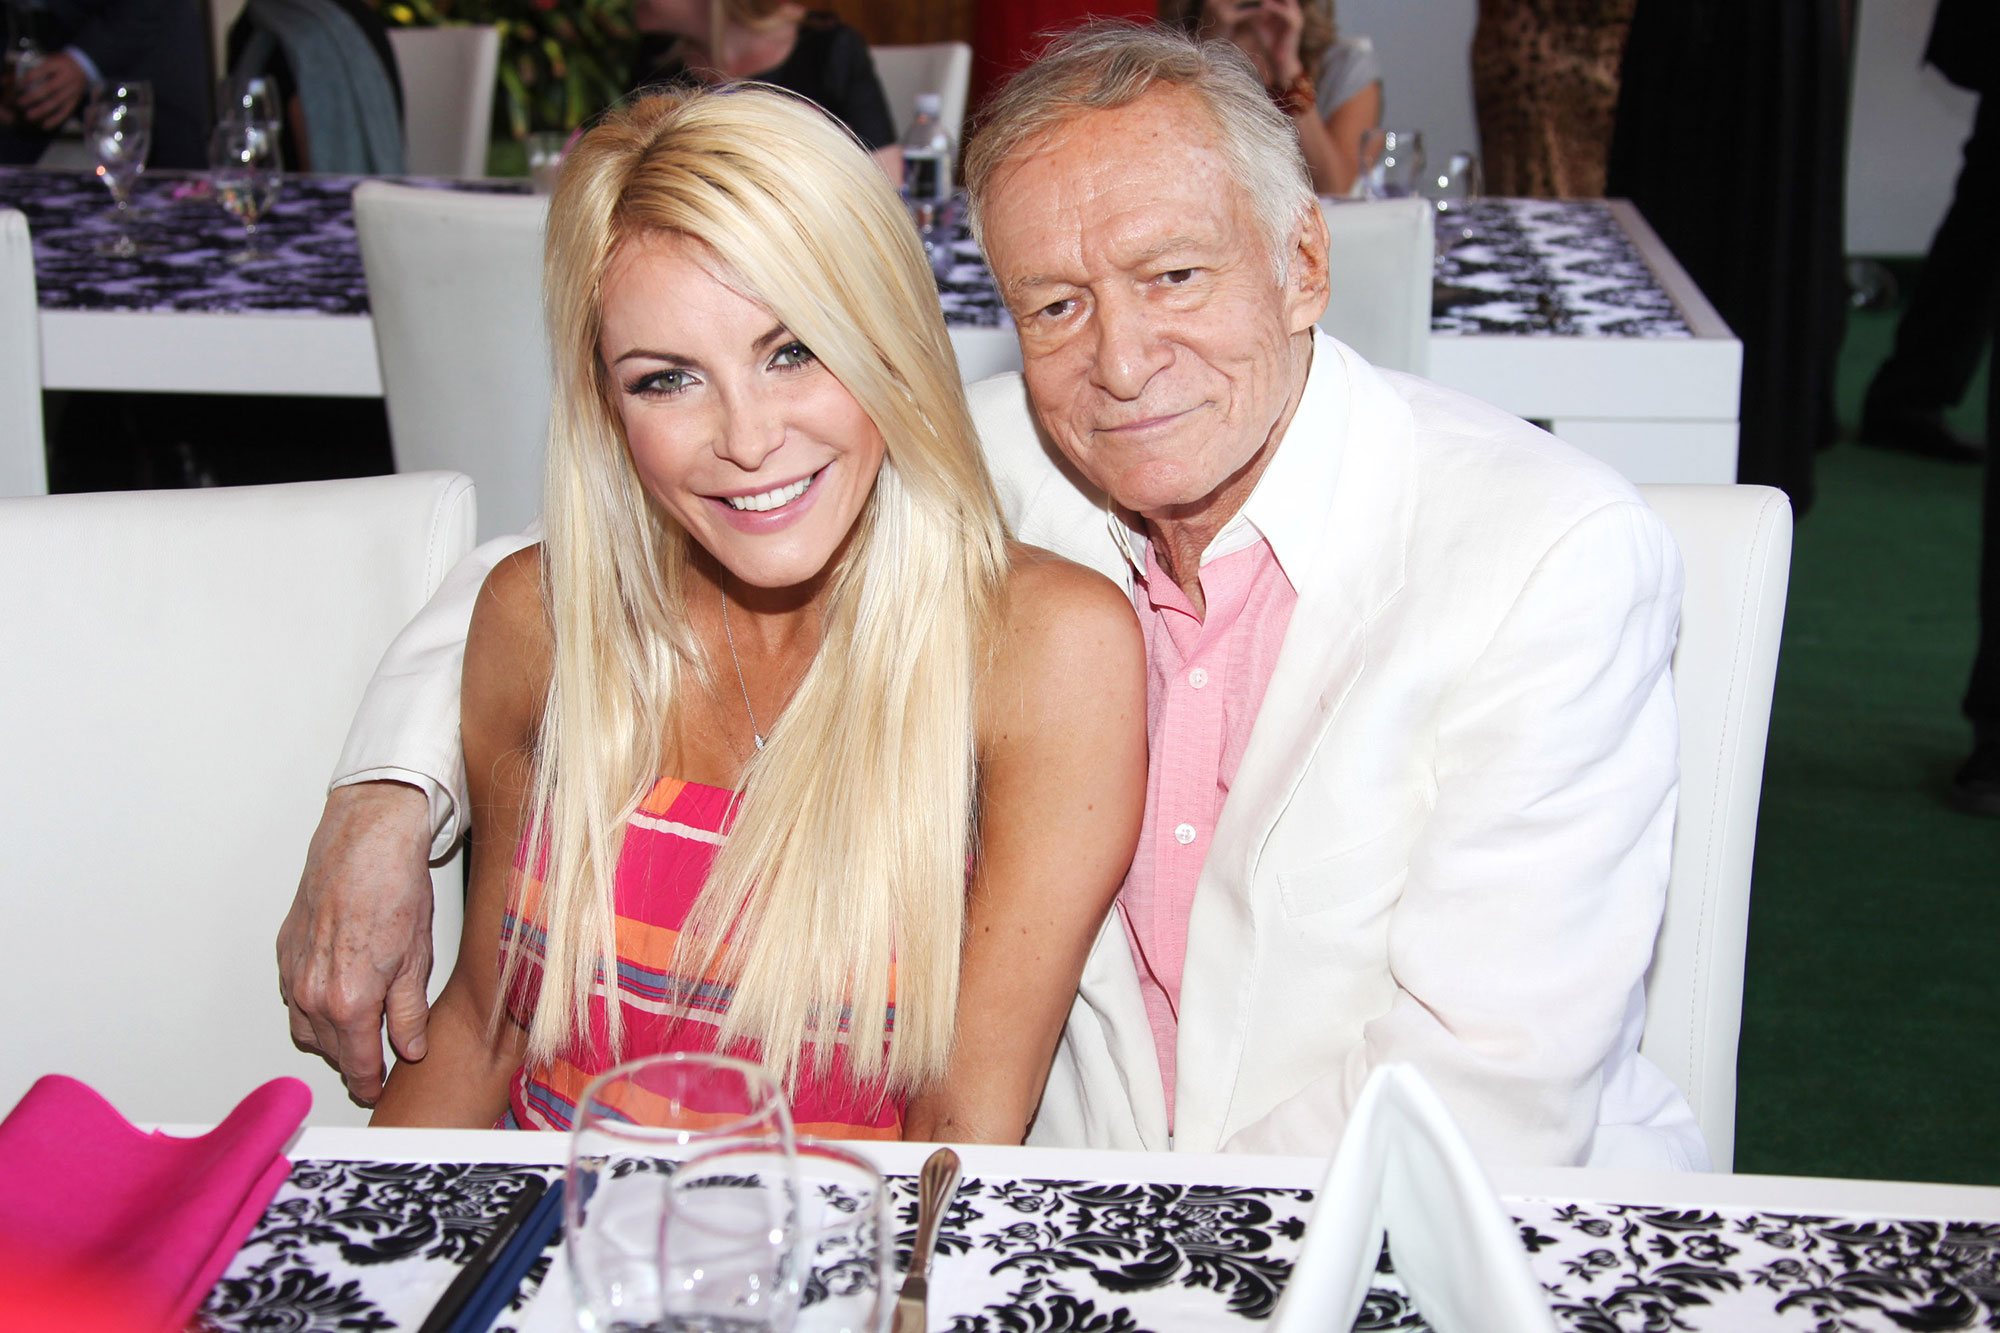 The Unconventional Love Story of Hugh and Crystal Hefner